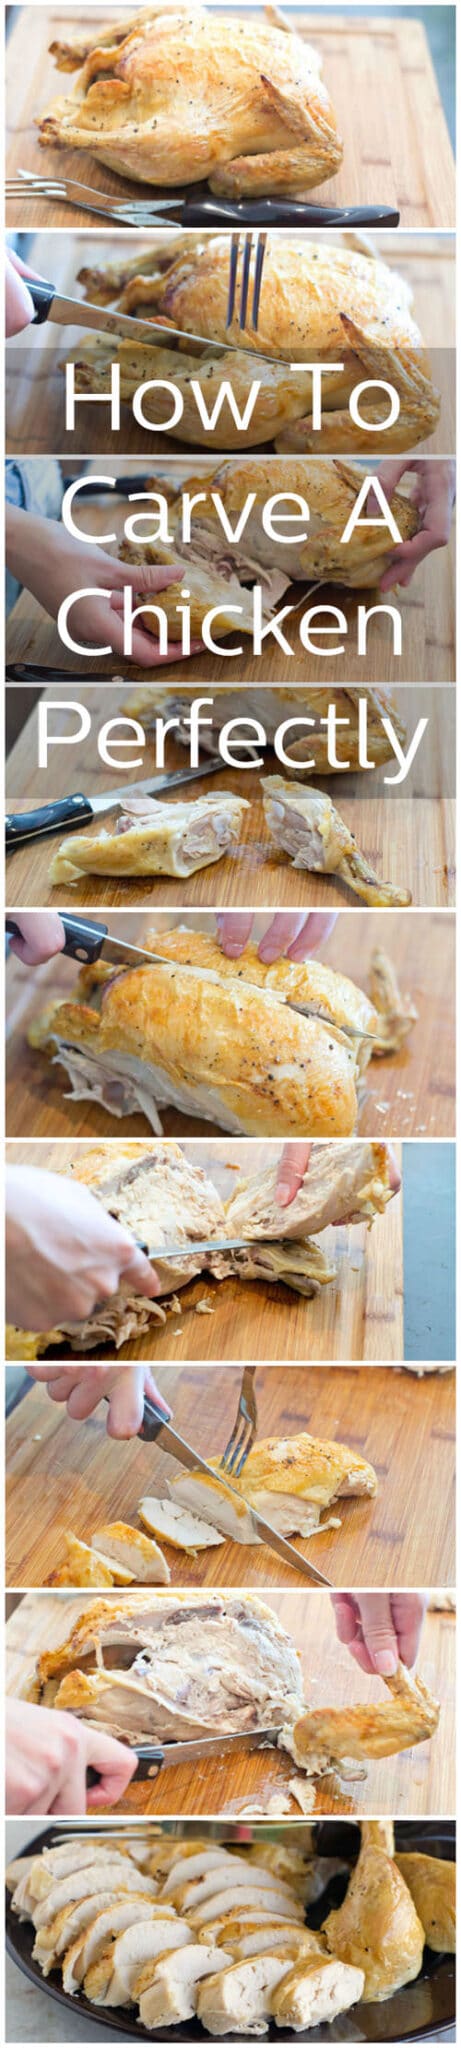 How To Carve a Chicken